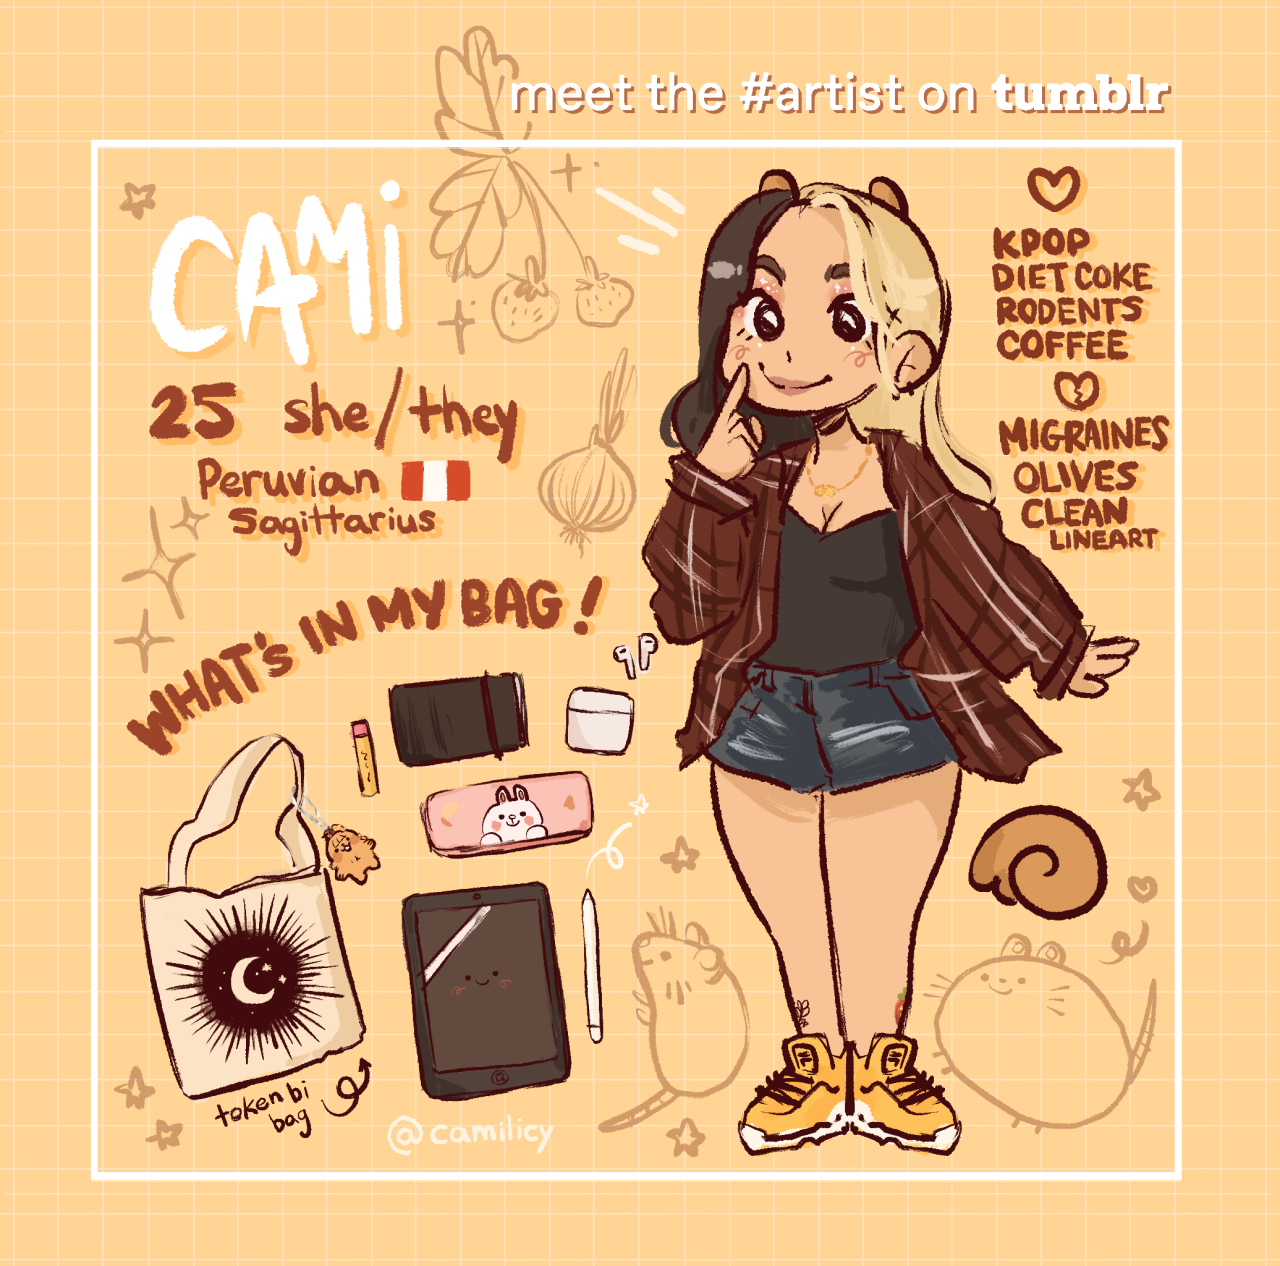 Meet the Artist: @camilicy“Hola! My name is Cami. I’m a Peruvian Freelance illustrator residing in the sunny lands of South Florida! I enjoy doodling silly animals and cute stuff using lots of warm colors like yellows and browns. Aside from digital...